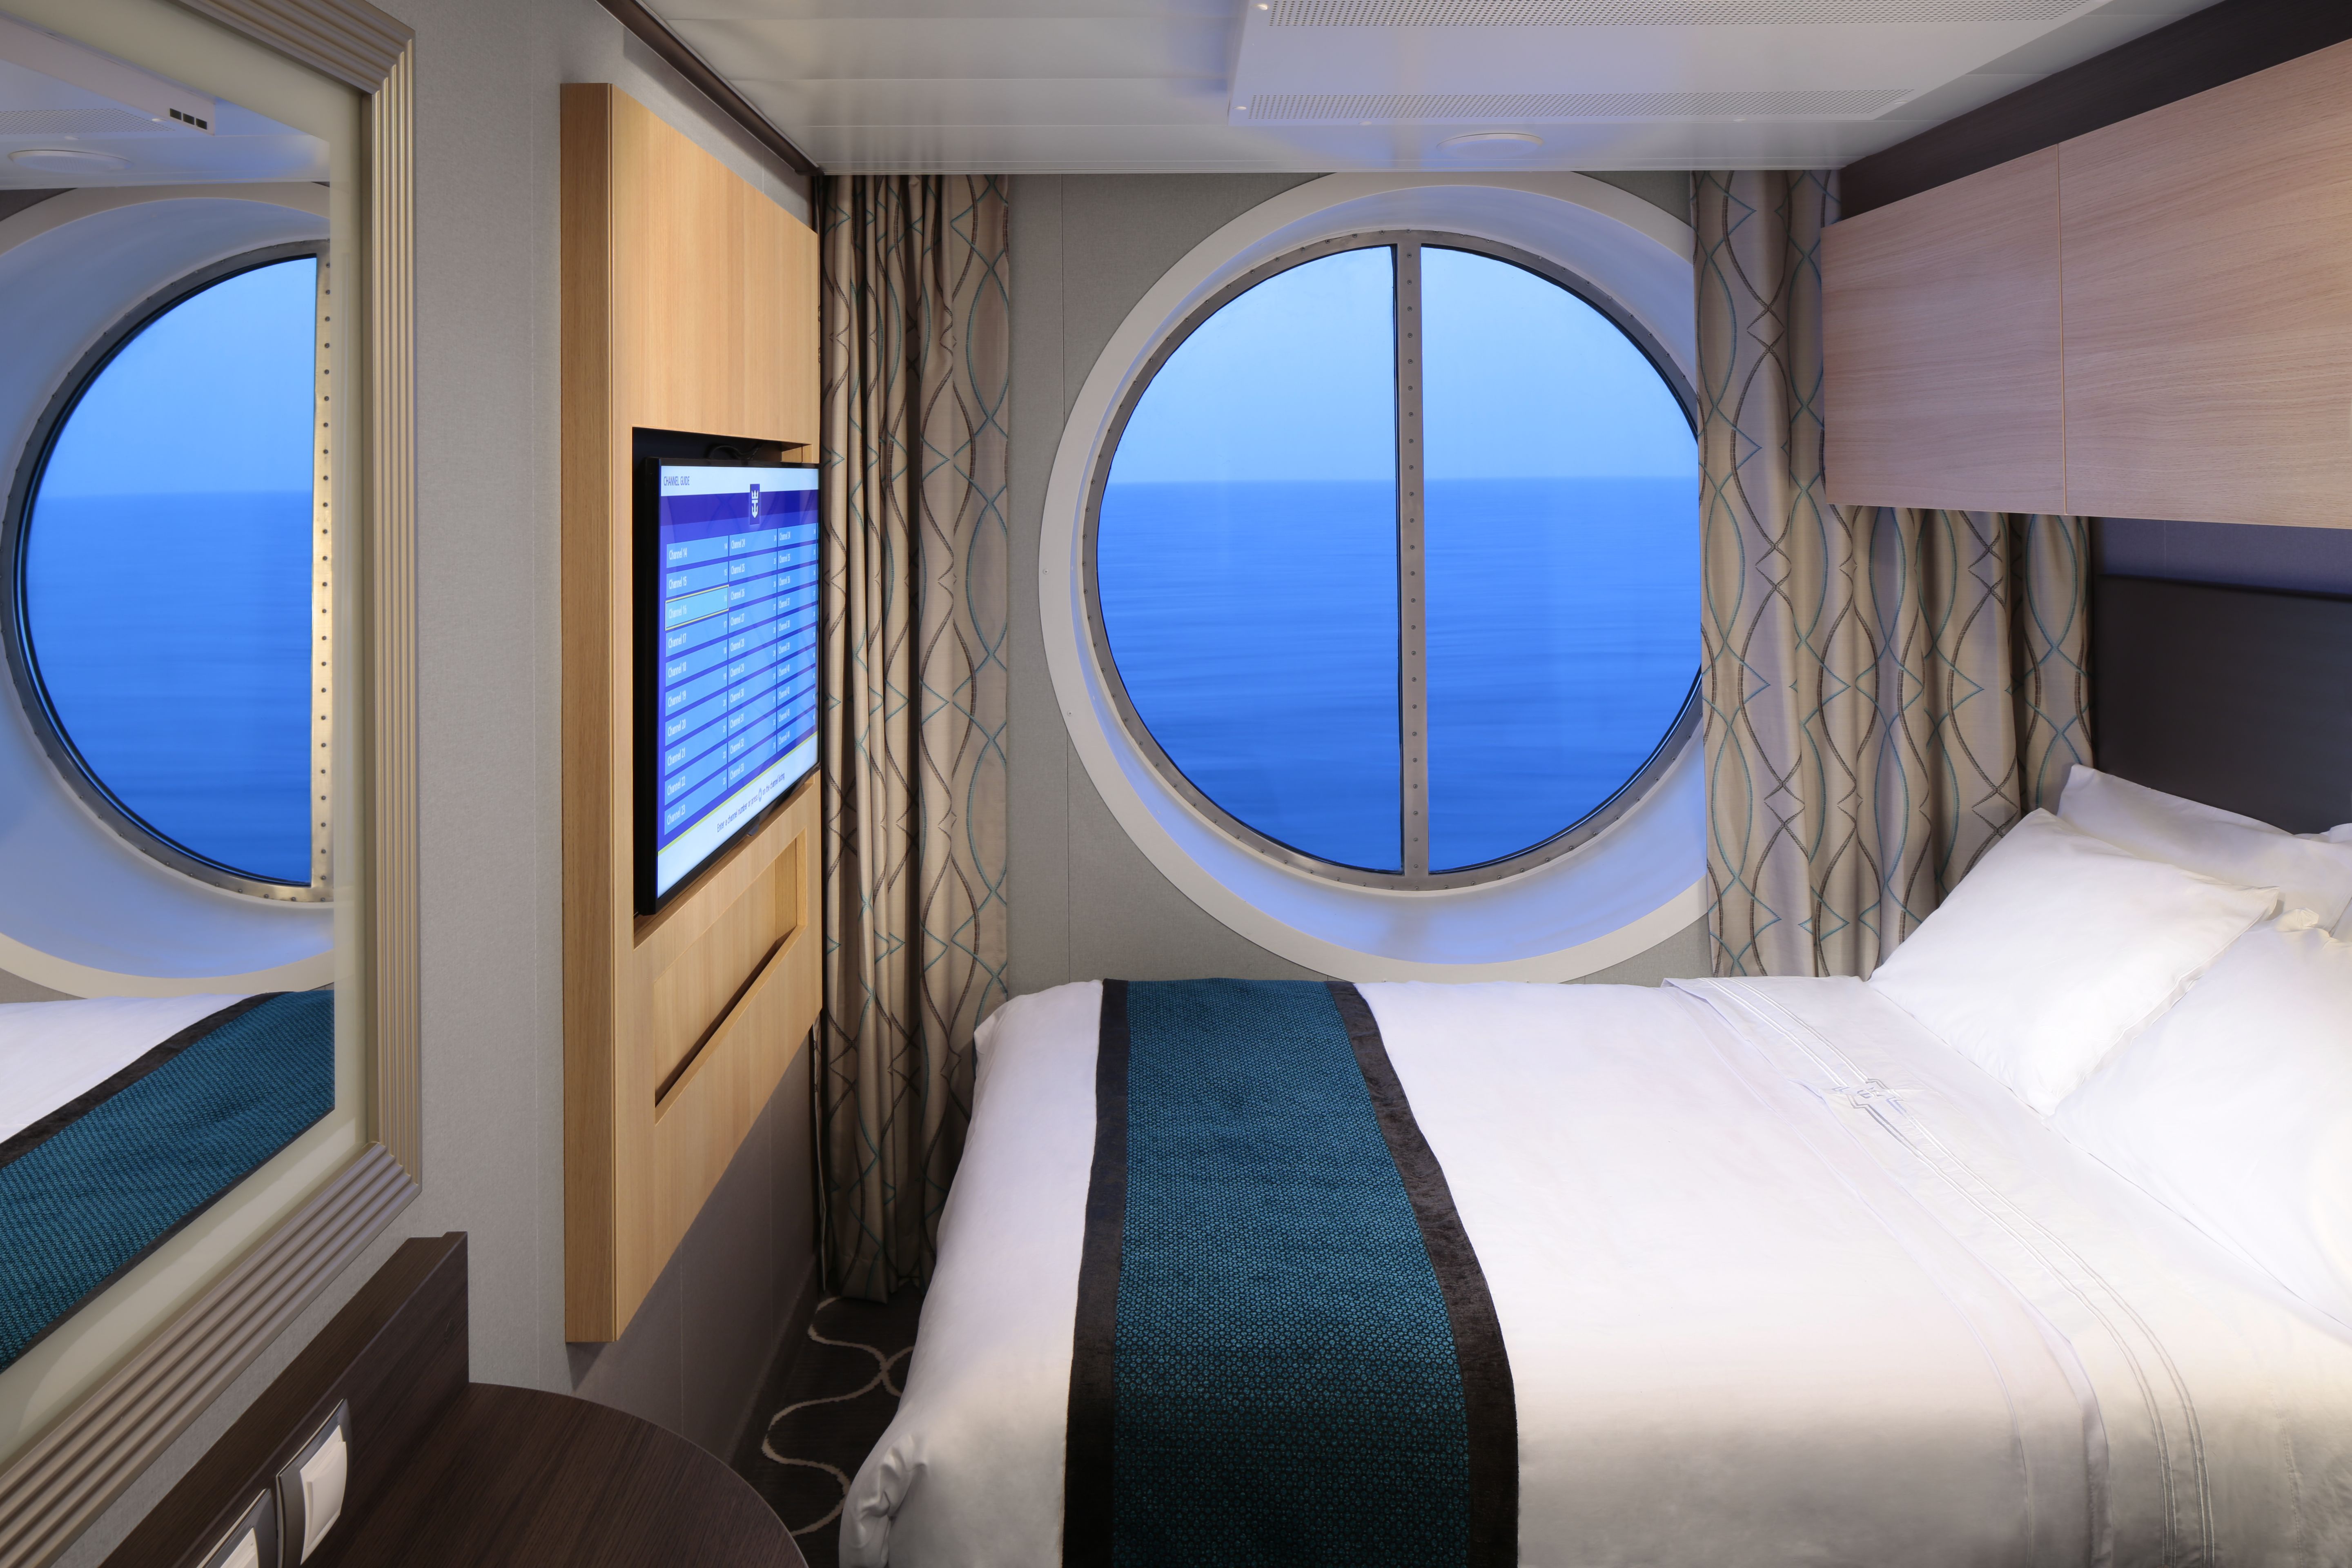 oceanview room on cruise